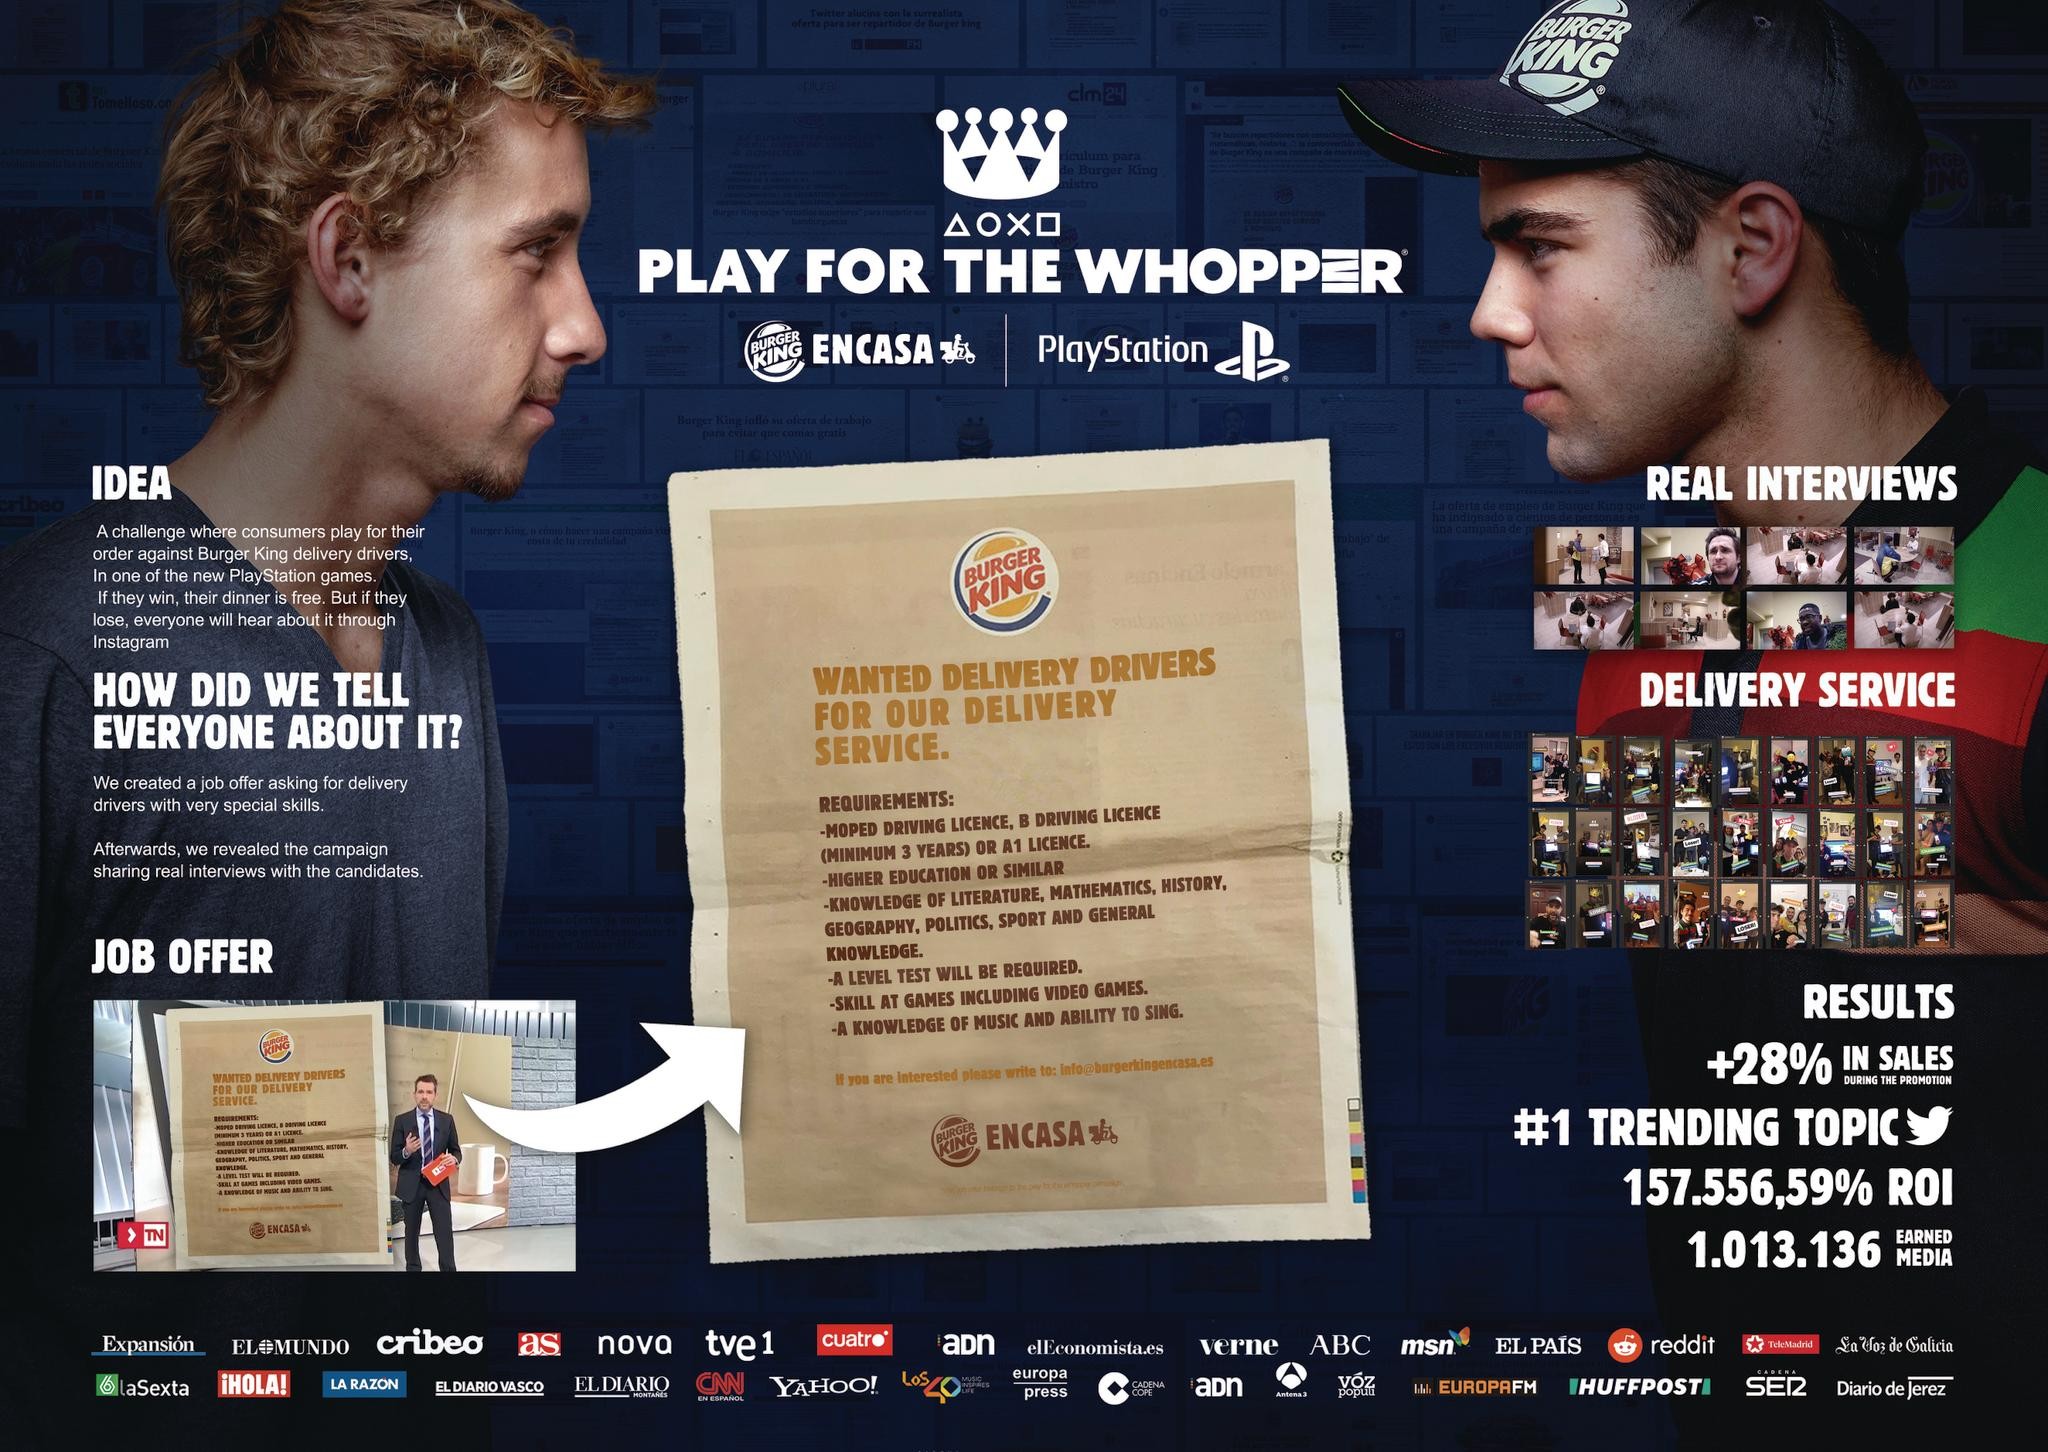 Play for the whopper